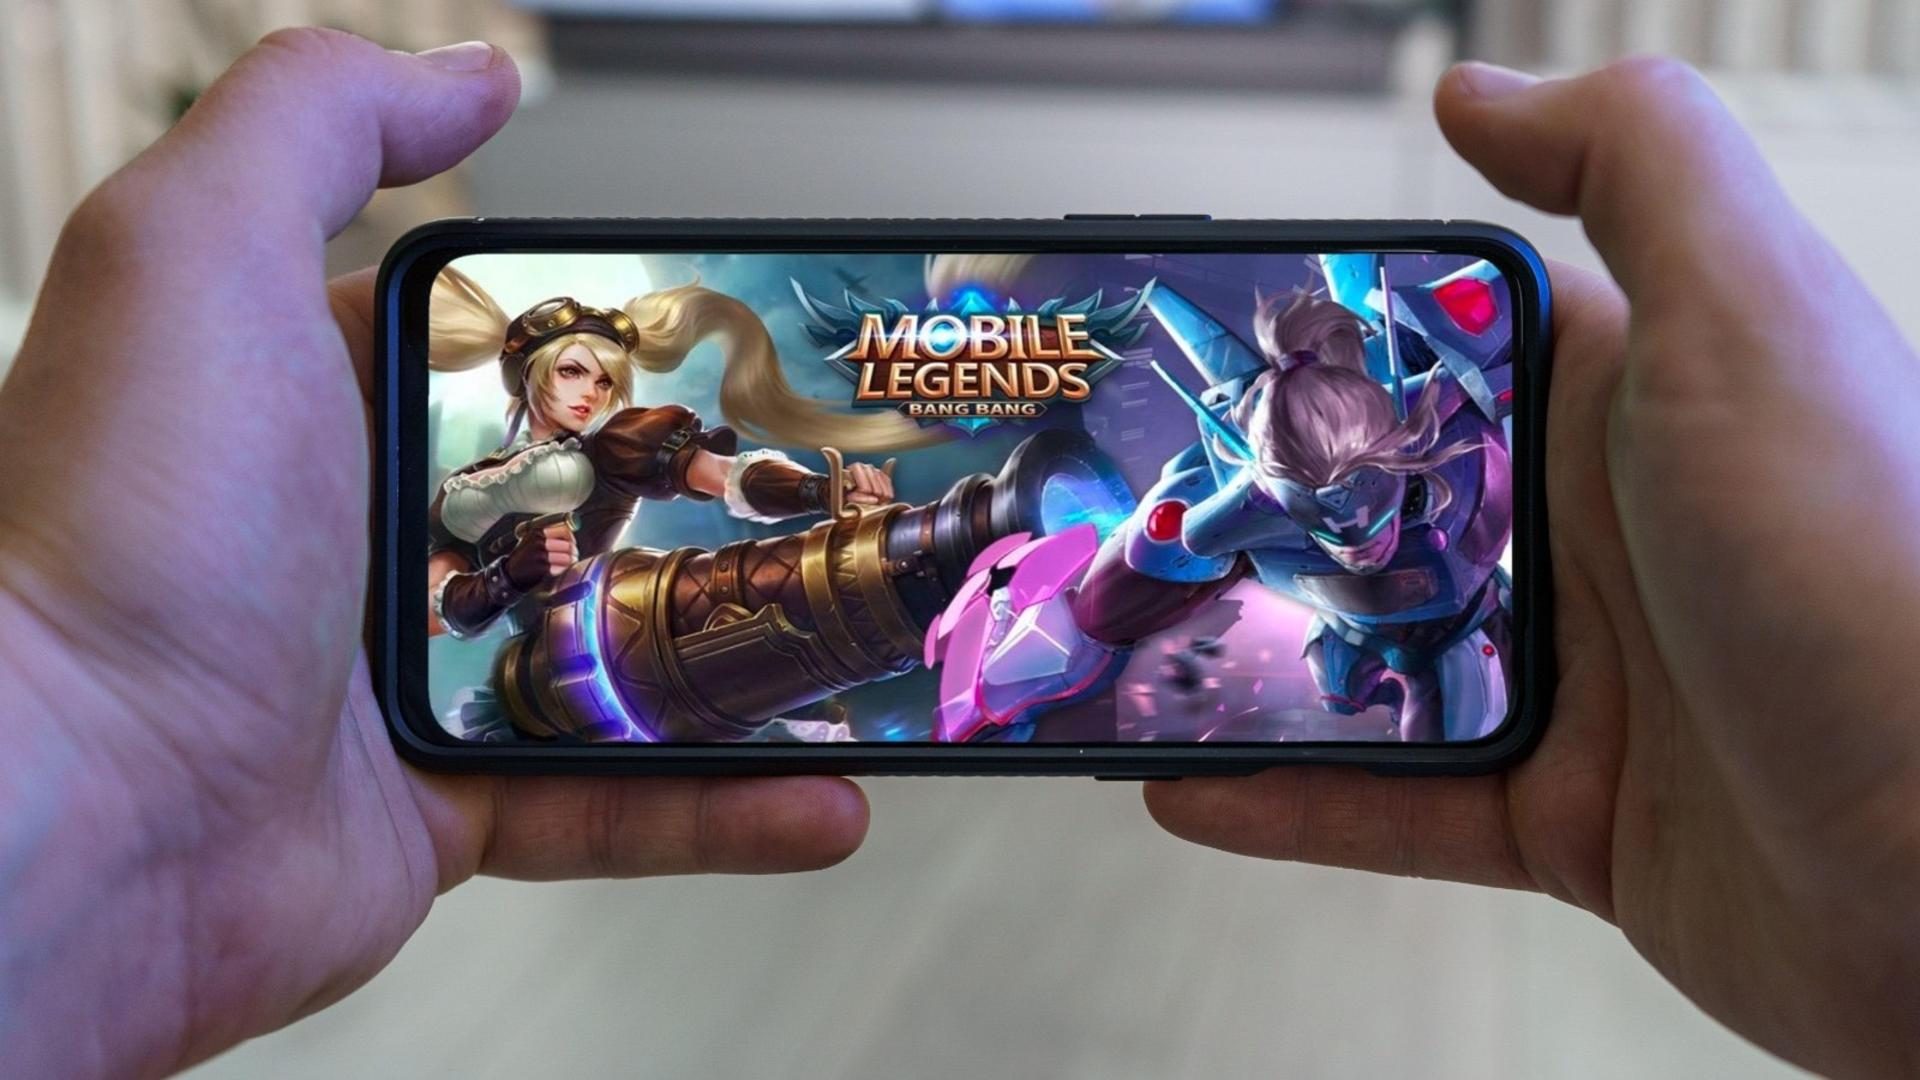 GET LIVE WALLPAPER MOBILE LEGENDS FOR YOUR PHONE 📱 